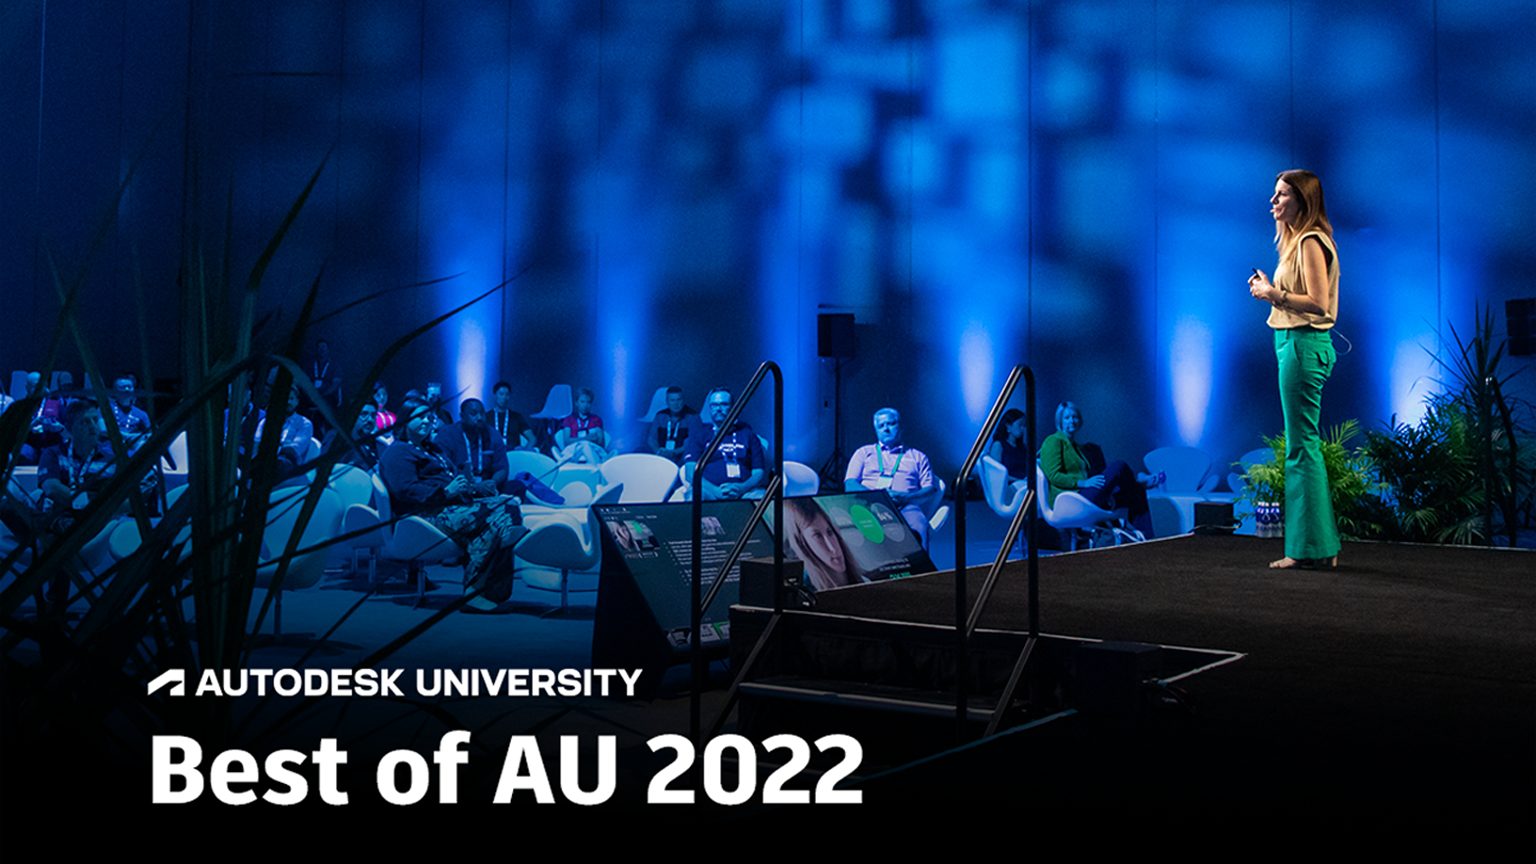 Best of AU 2022 Awards TopRated Classes and Speakers Autodesk